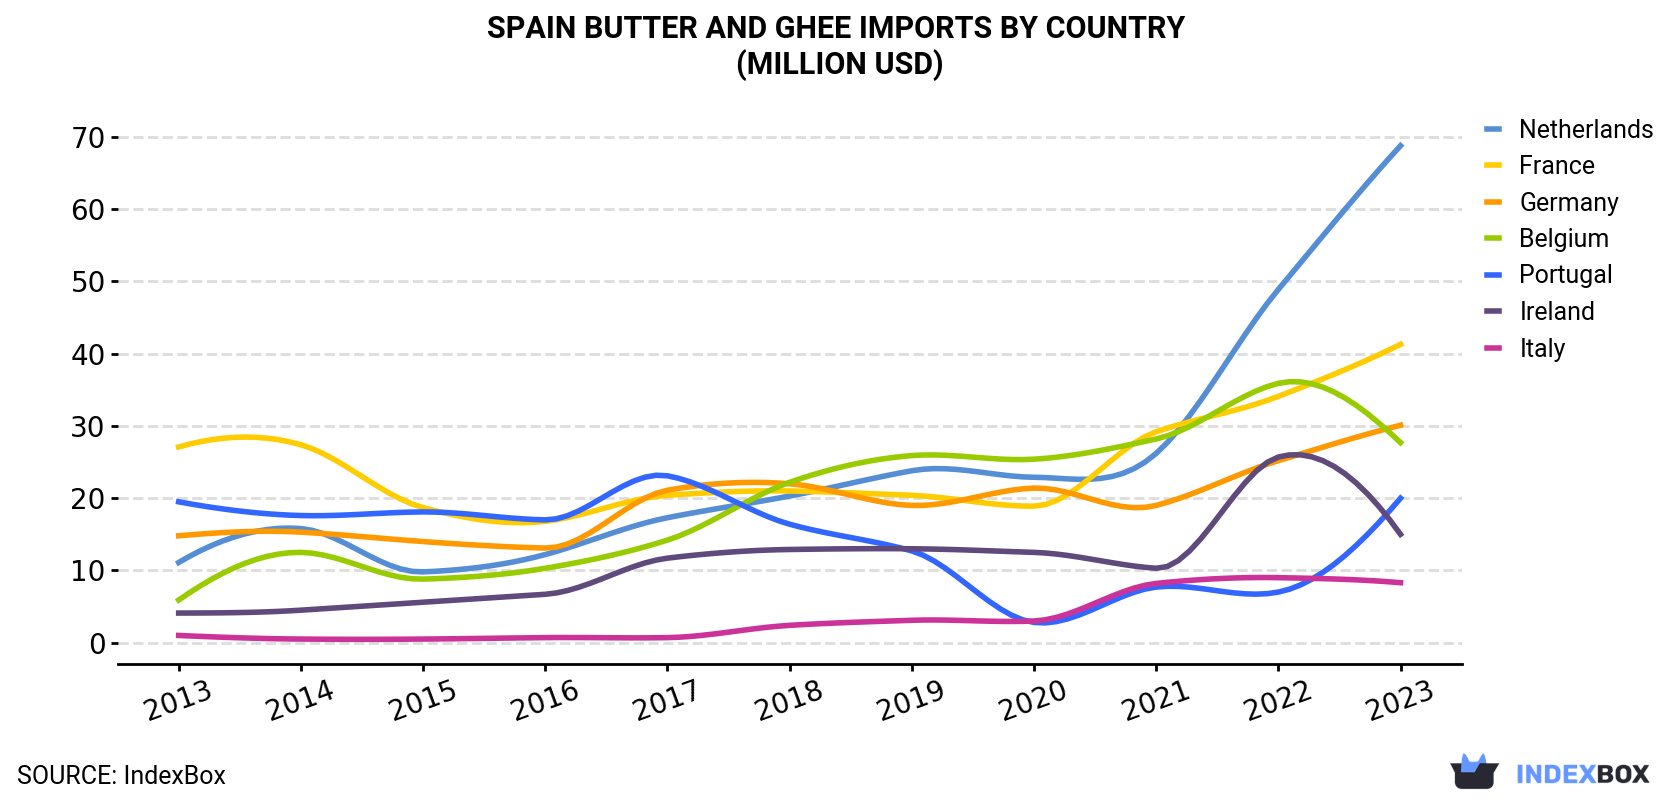 Spain Butter And Ghee Imports By Country (Million USD)